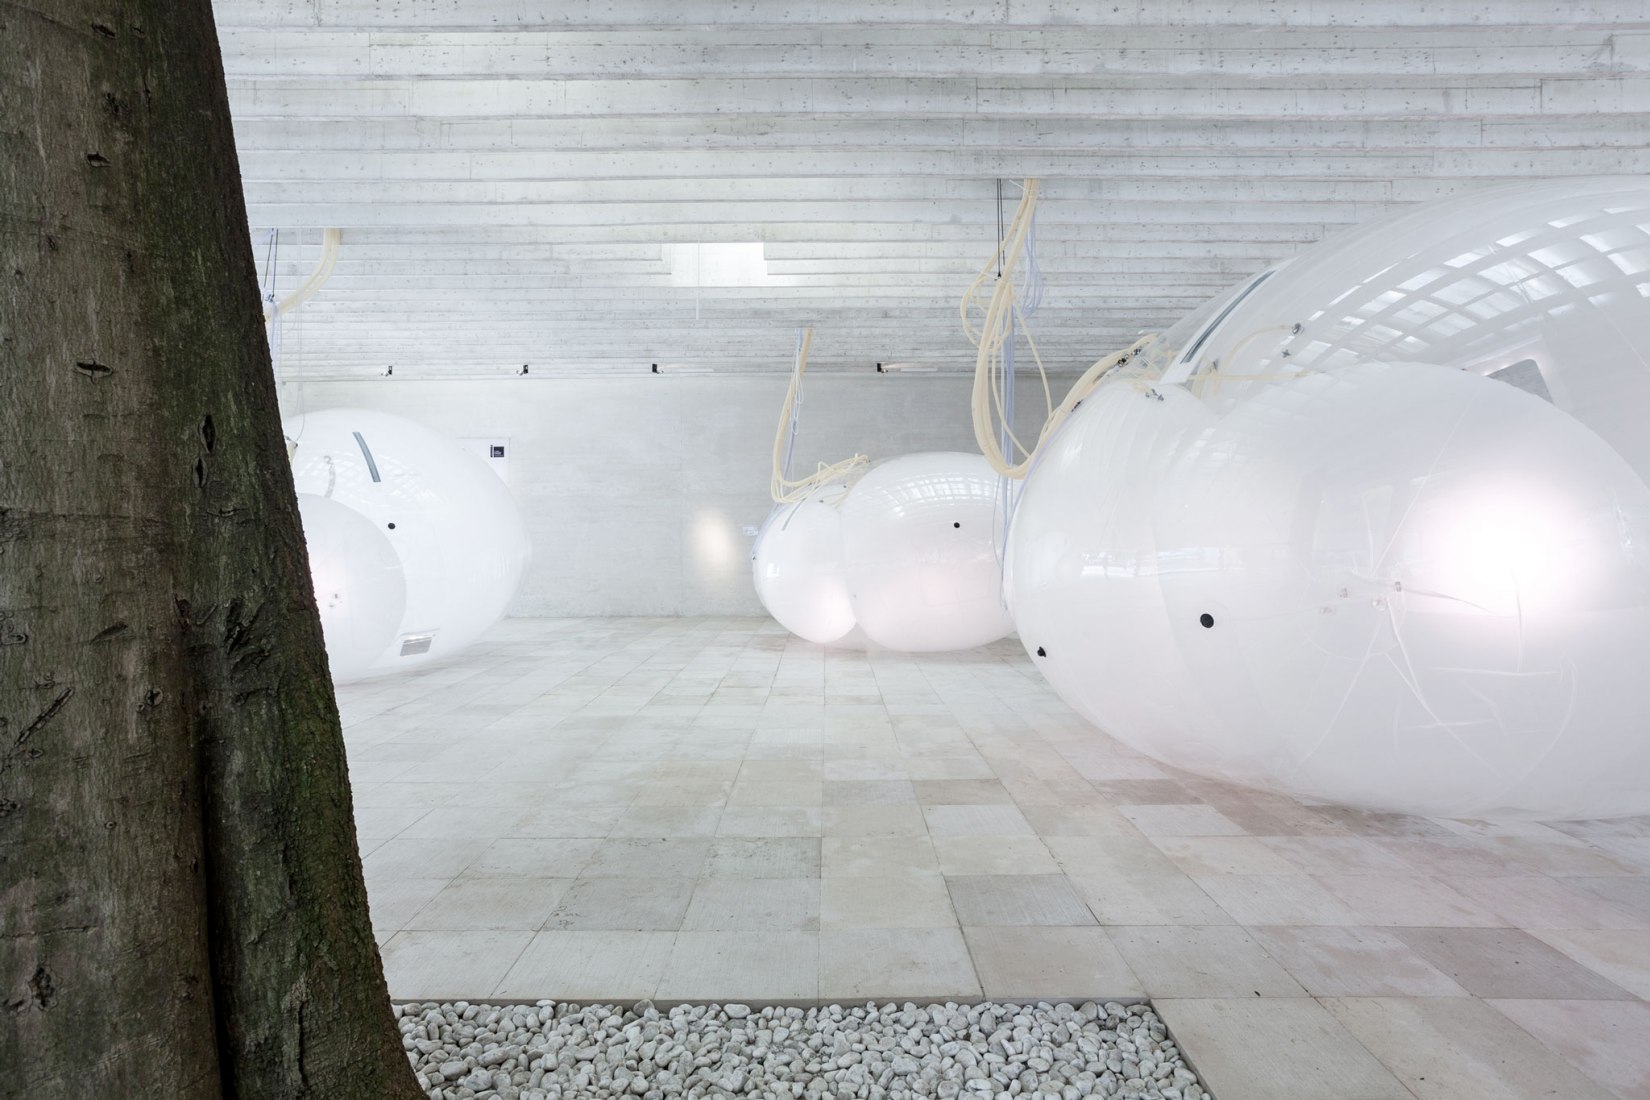 Another Generosity. Nordic Pavilion by Eero Lundén. Photograph by Andrea Ferro